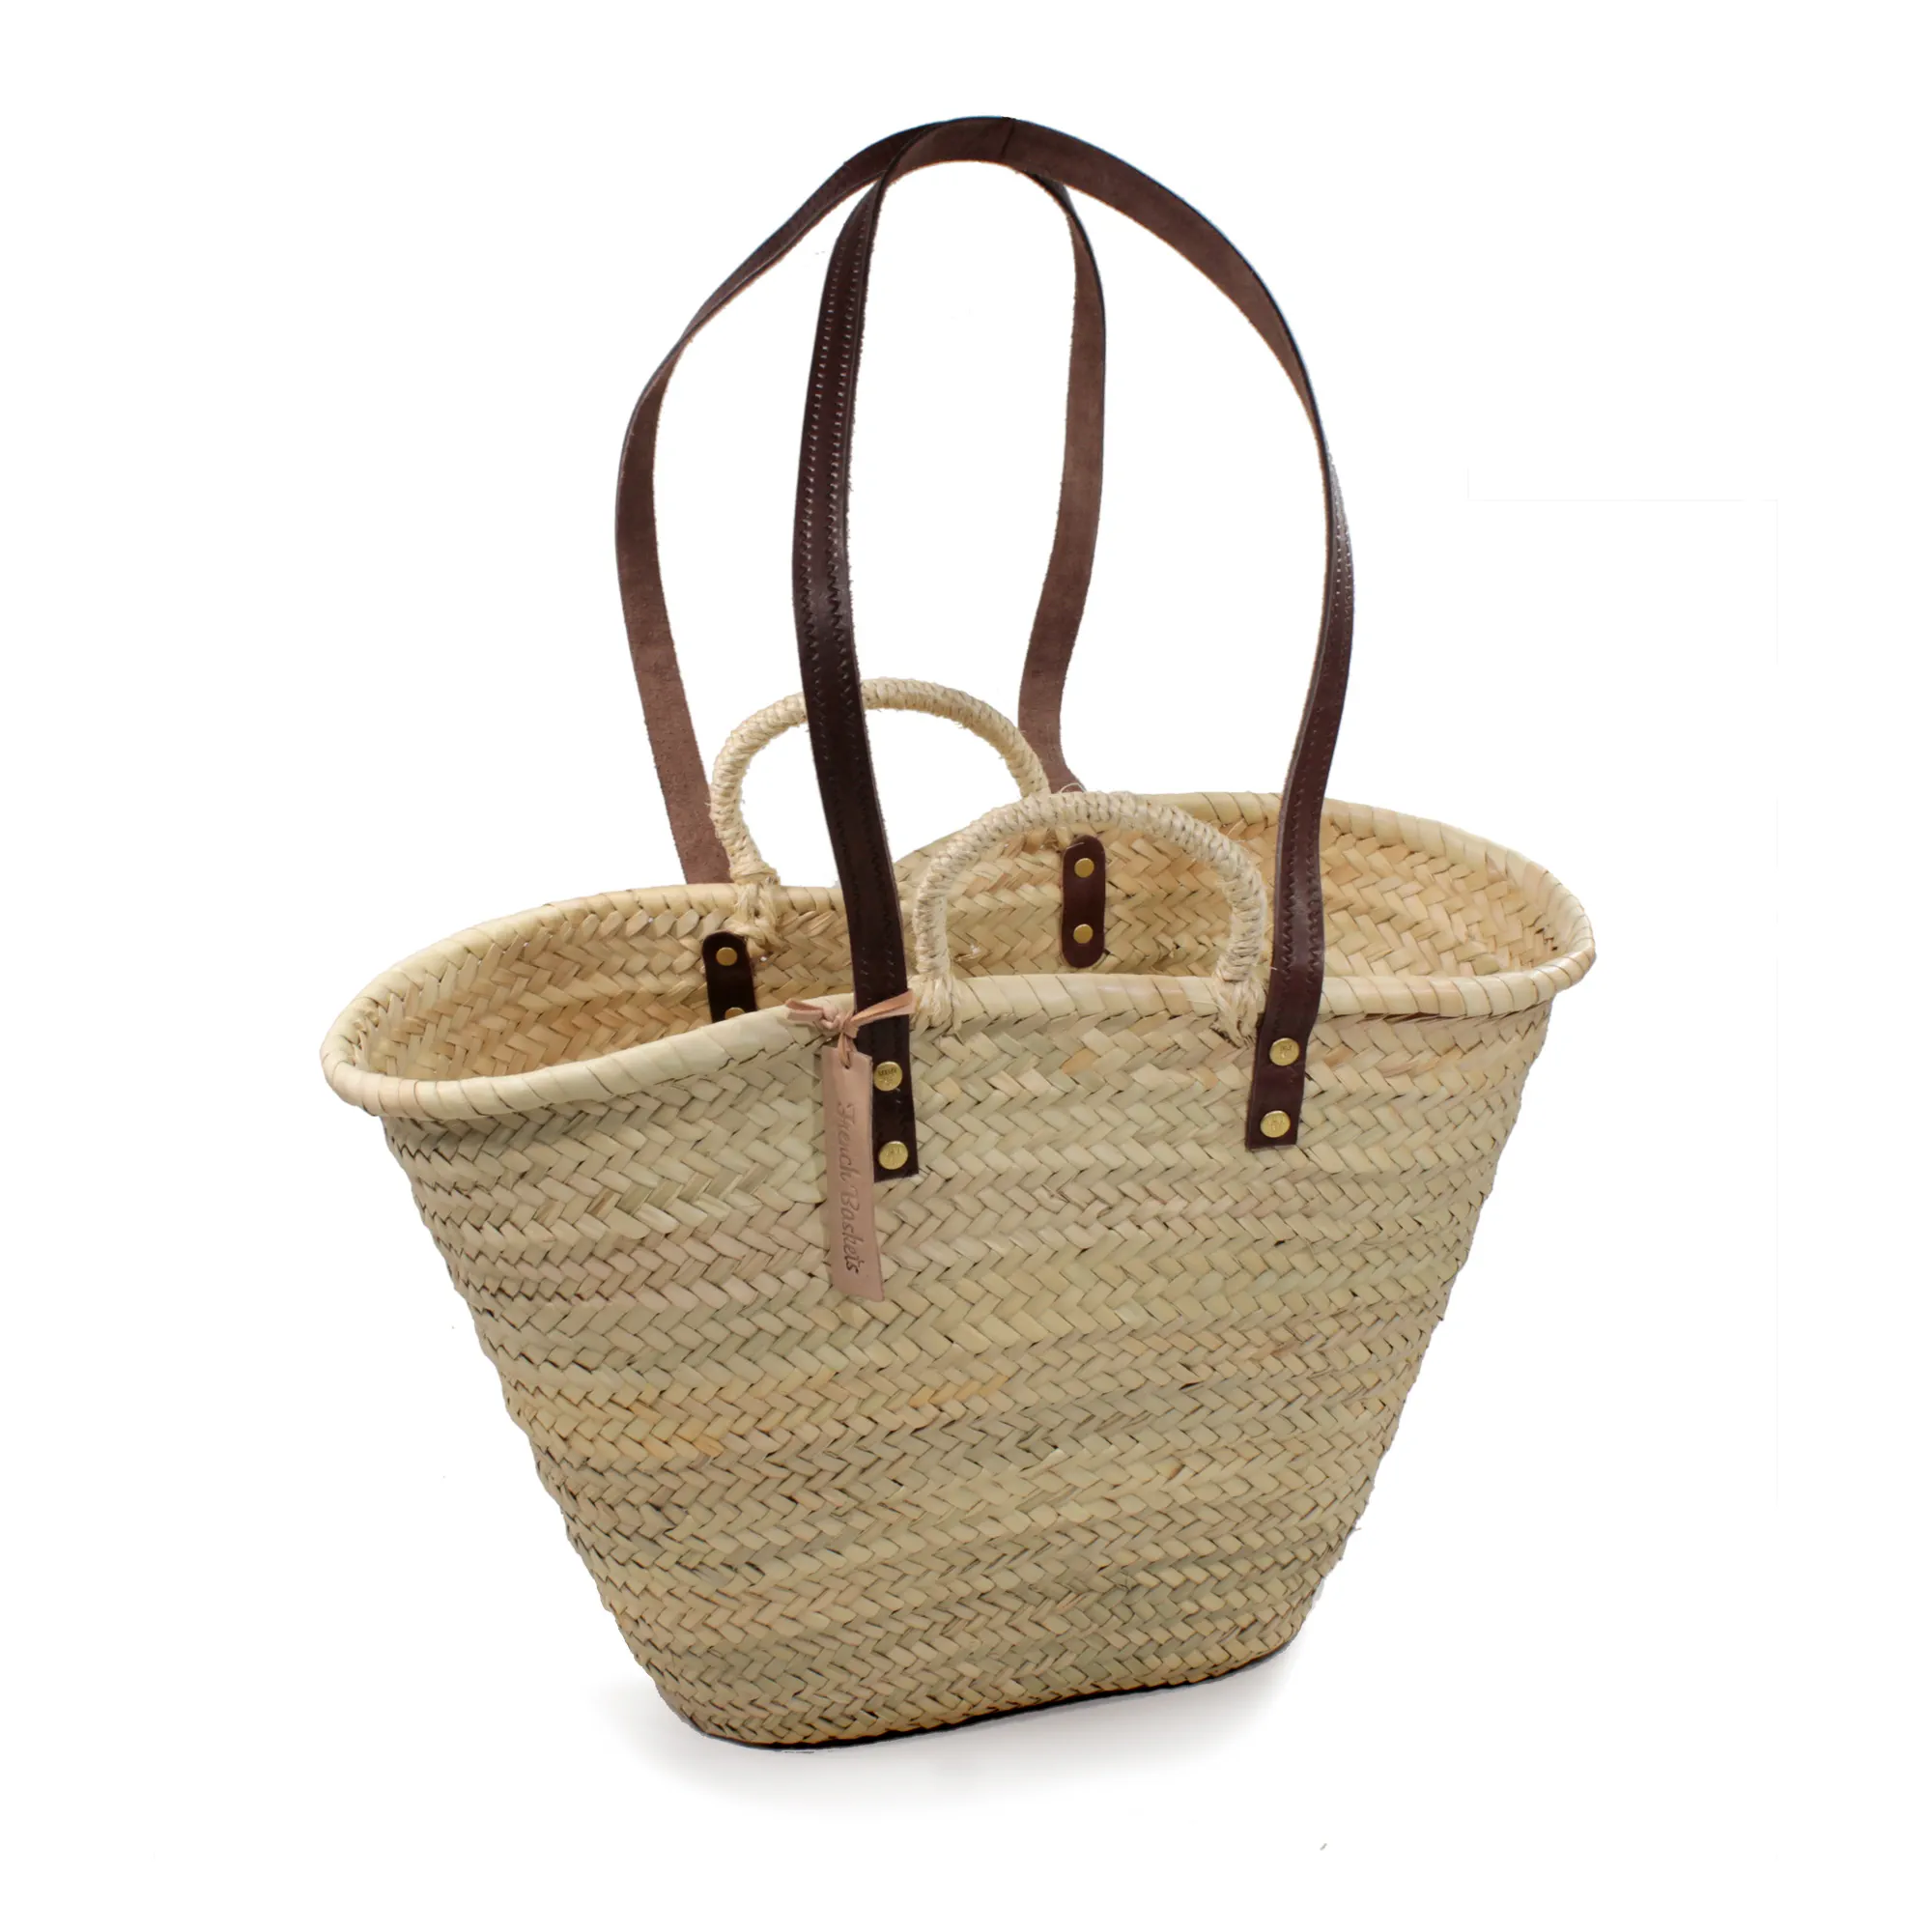 Straw tote Bag french basket Double handle flat leather and rope ...